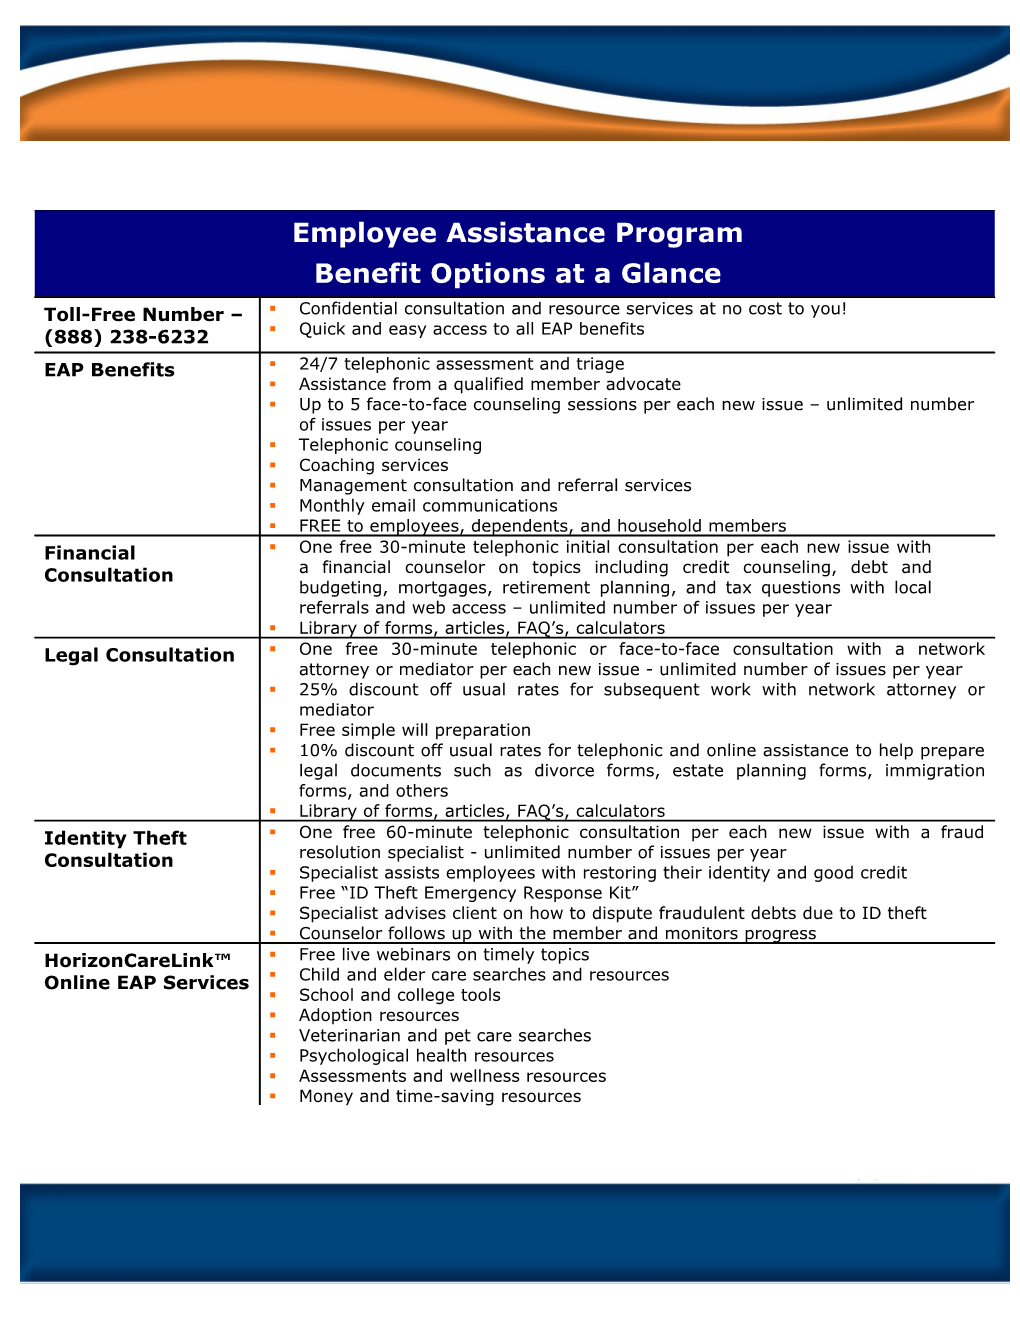 Employee Assistance Program Benefit Options at a Glance